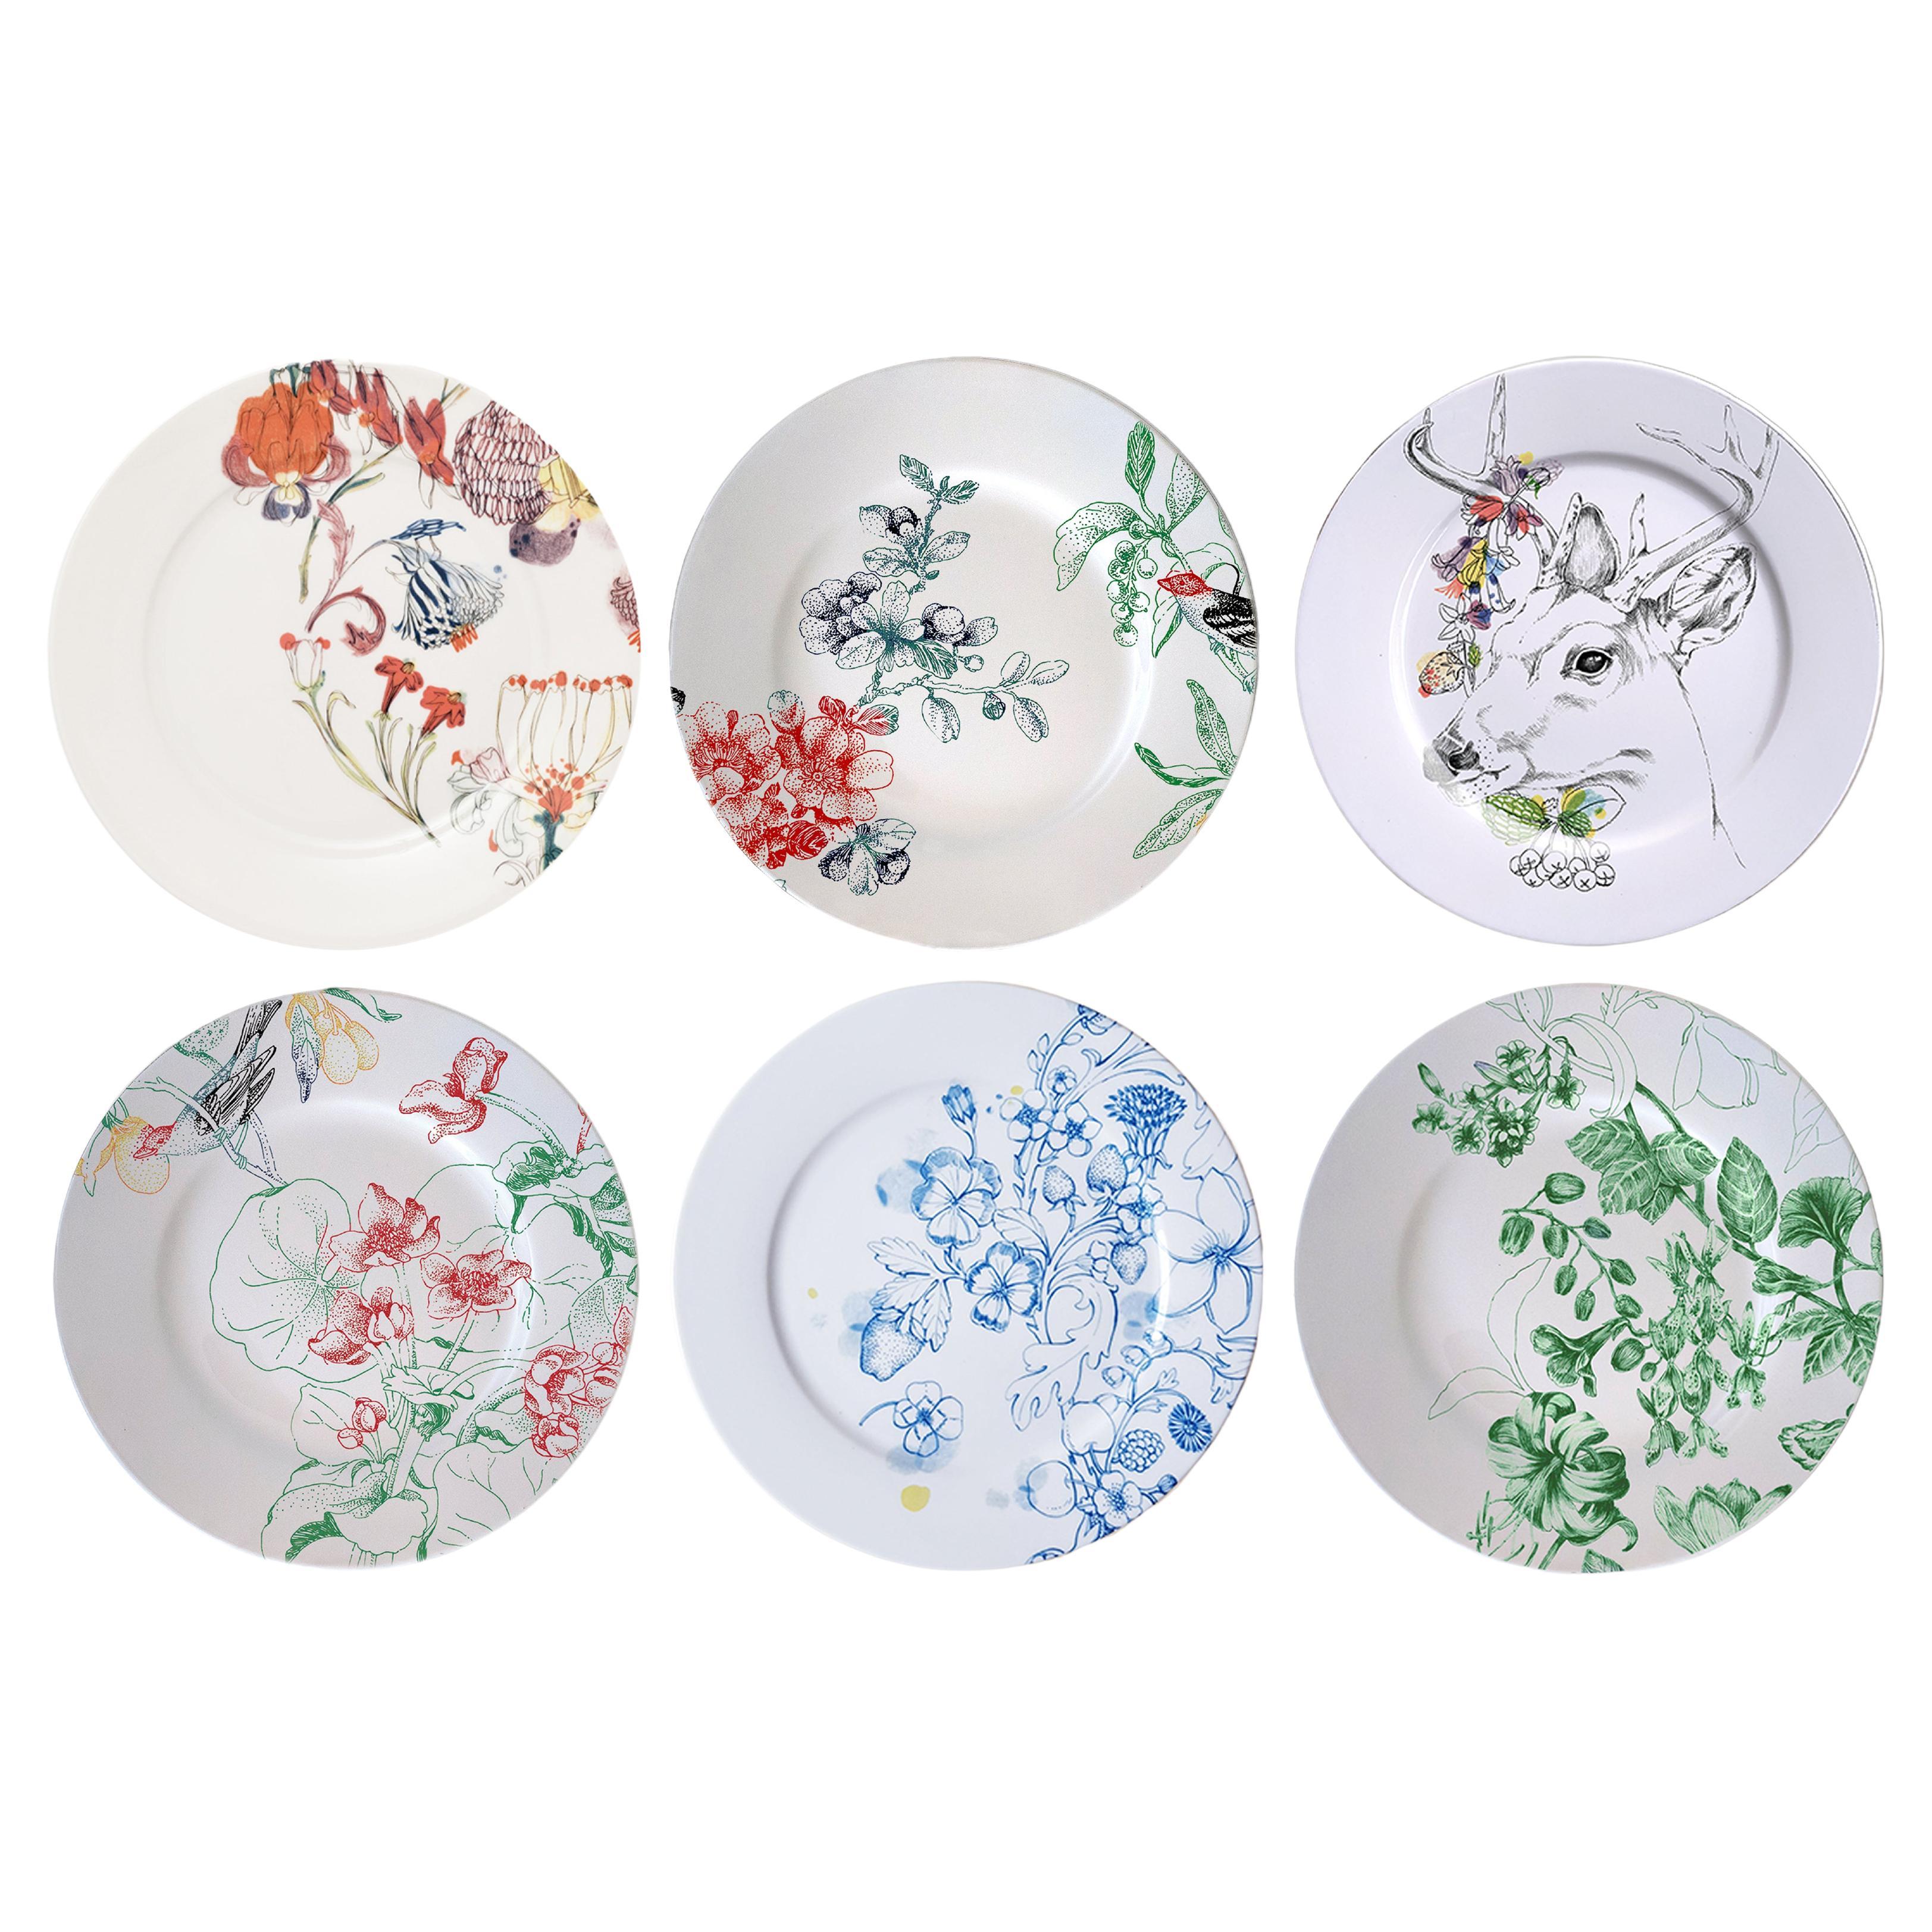 Mix & Match, Six Contemporary Porcelain Dinner Plates with Flowers and Animals